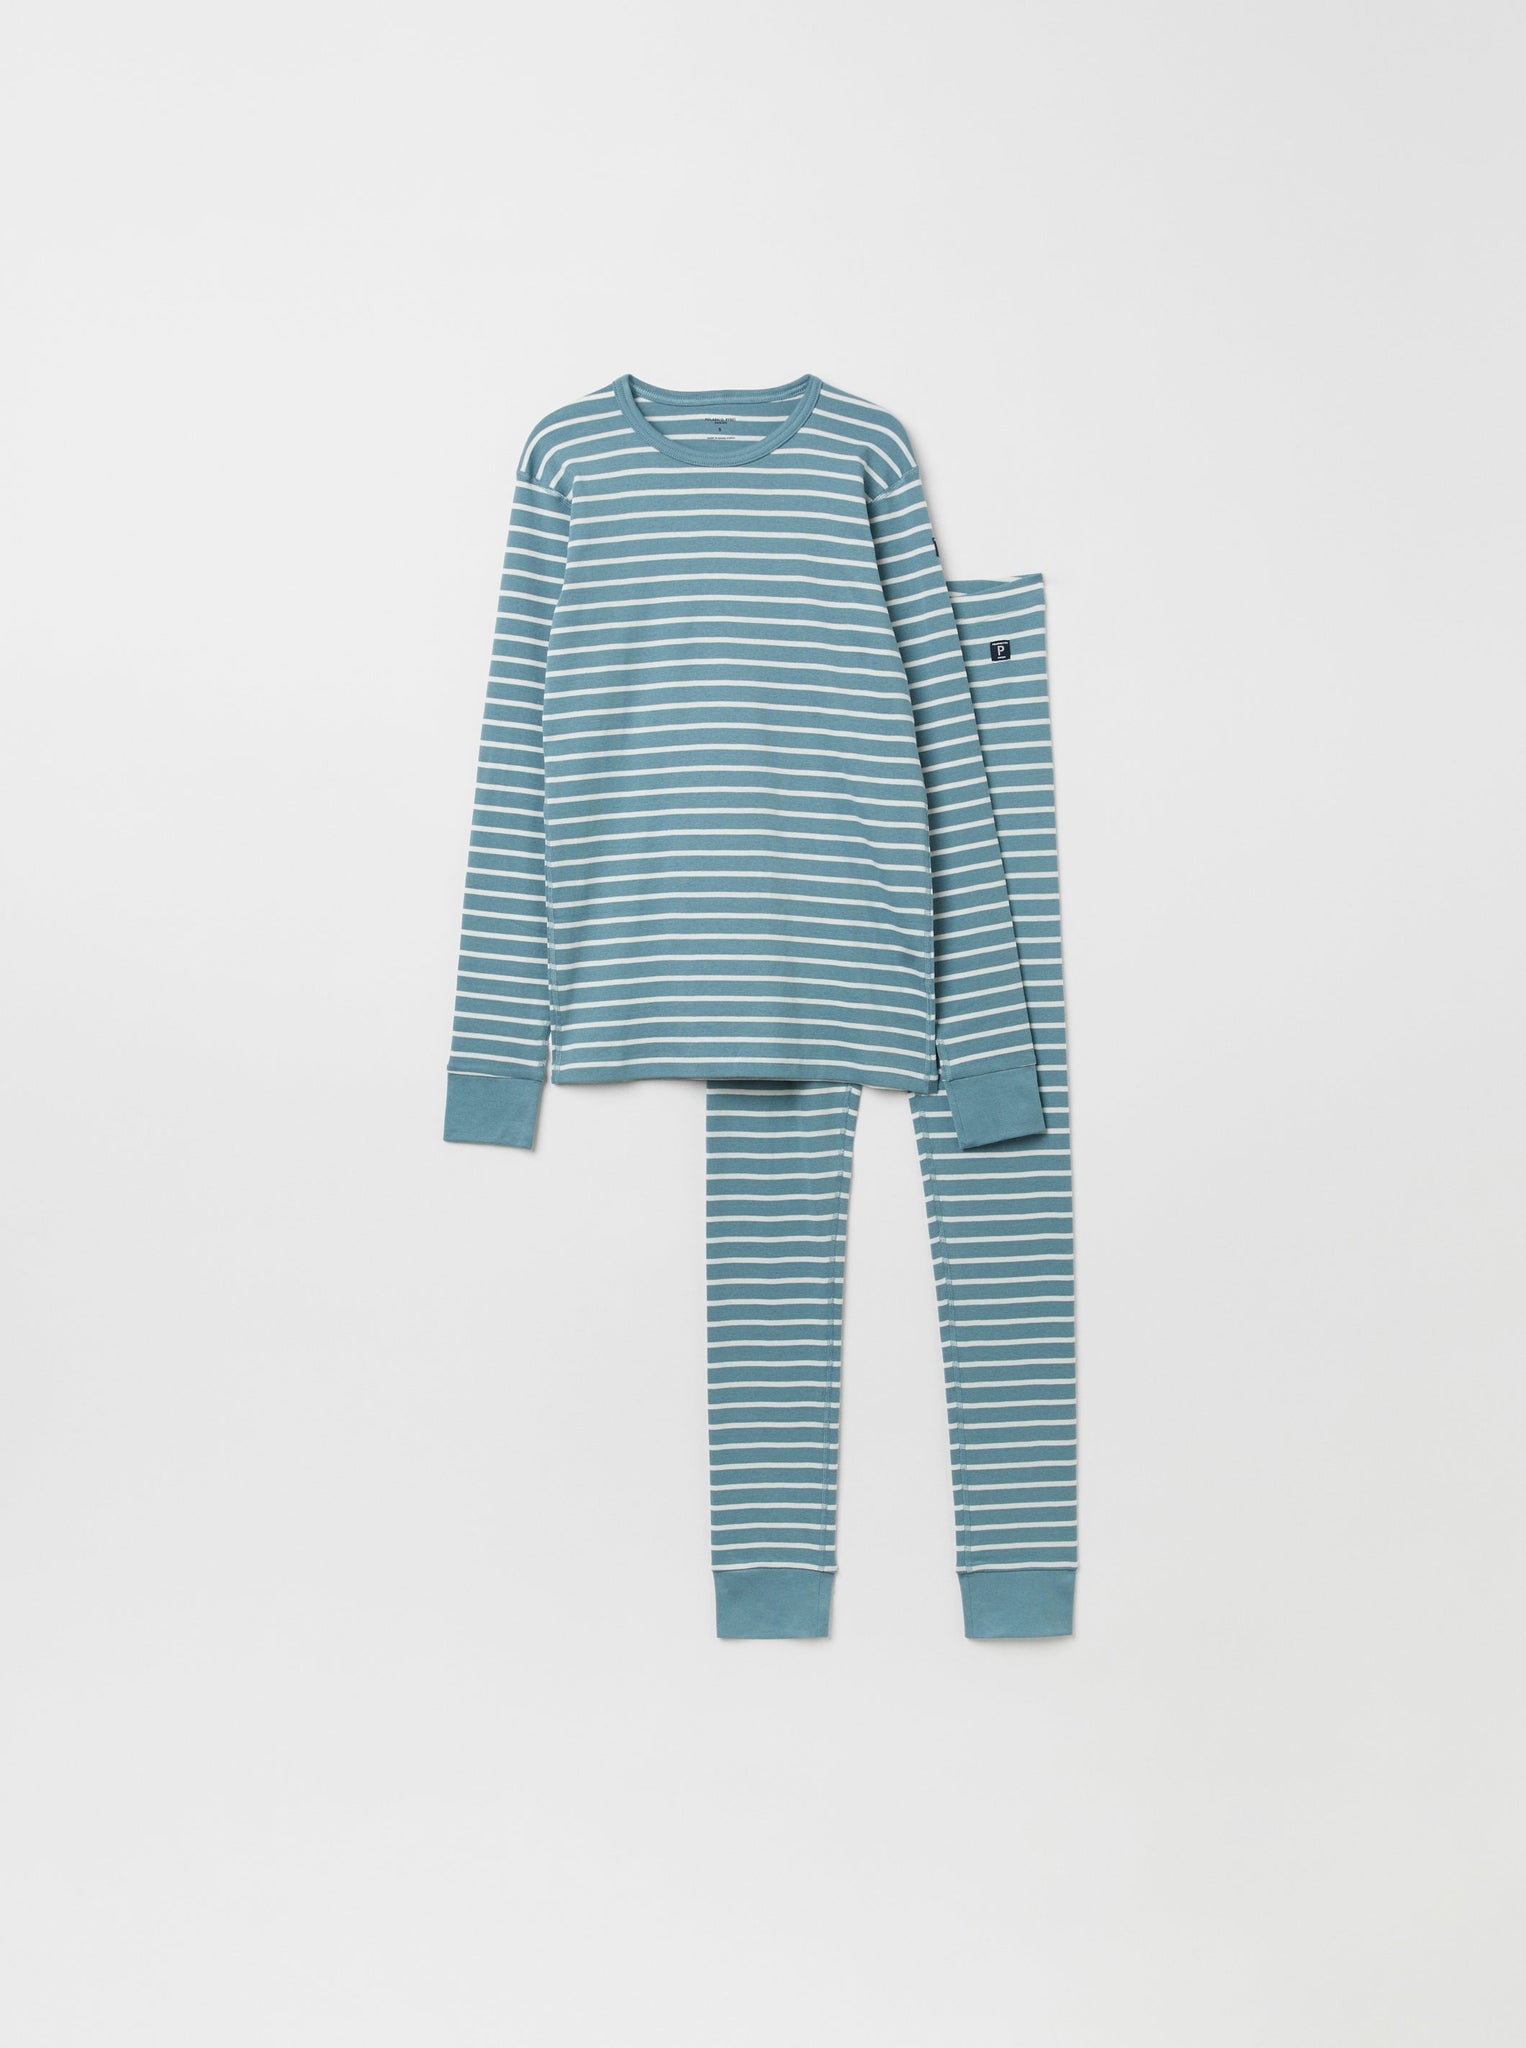 Organic Cotton Blue Adult Pyjamas from the Polarn O. Pyret adult collection. Ethically produced kids clothing.